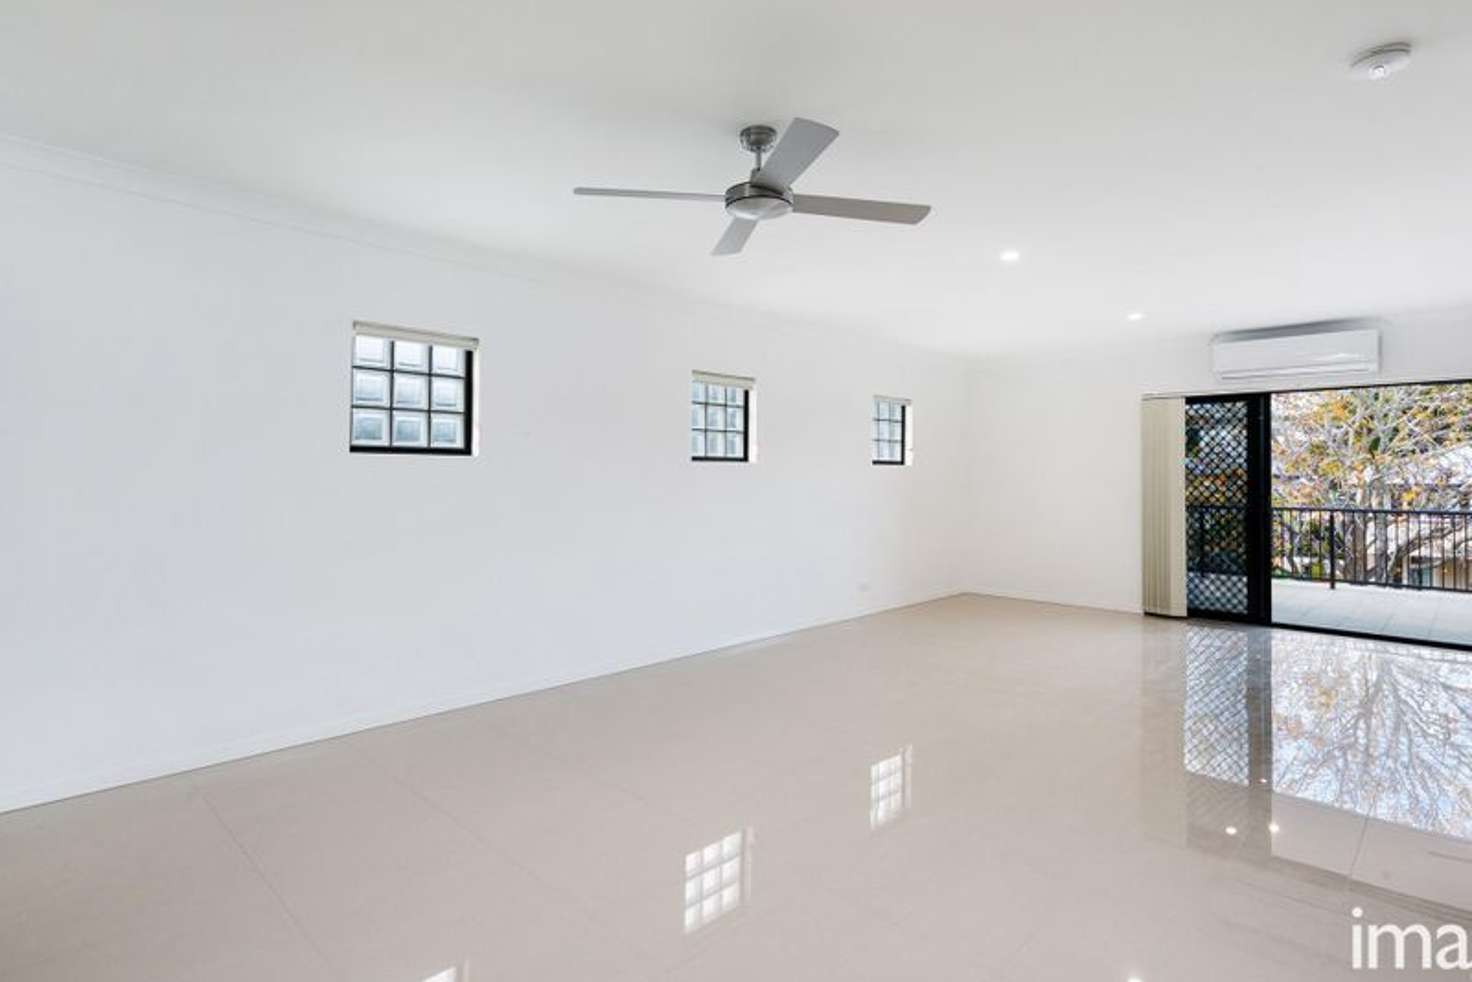 Main view of Homely unit listing, 15/17 Buddina St, Stafford QLD 4053